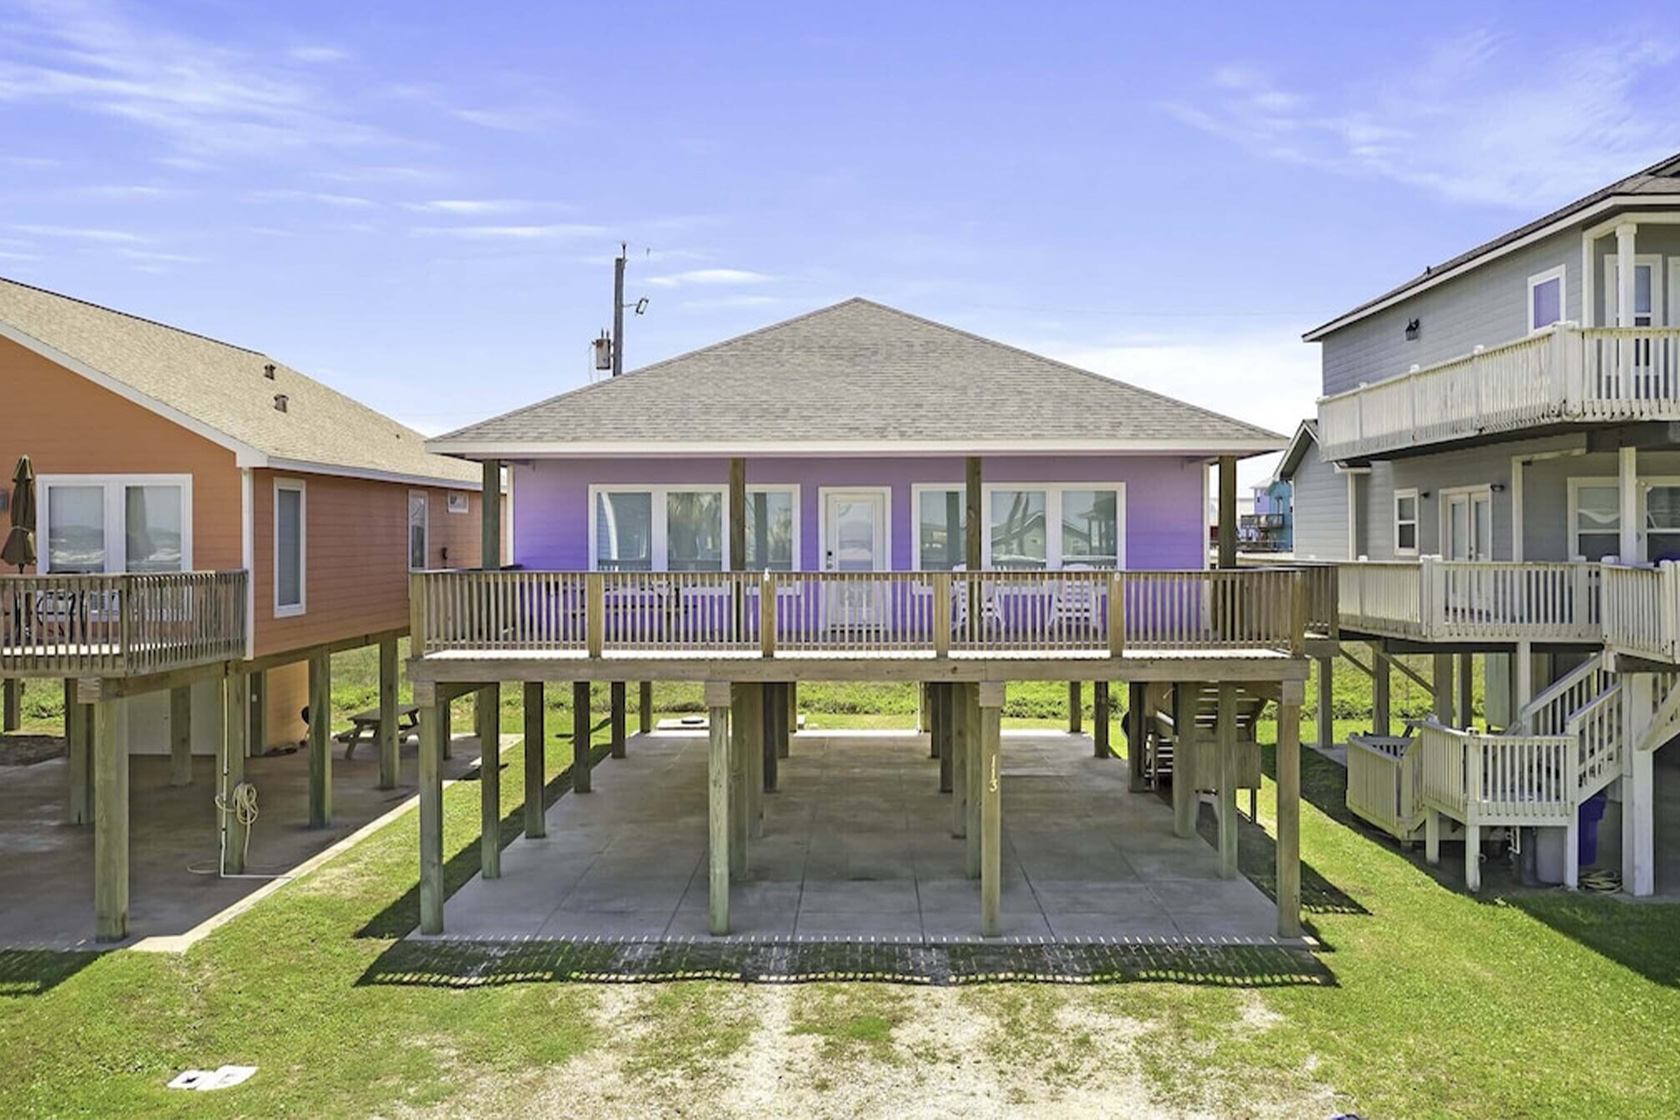 The Purple Pelican Vrbo rental offers a vibrant source of relaxation in Surfside Beach